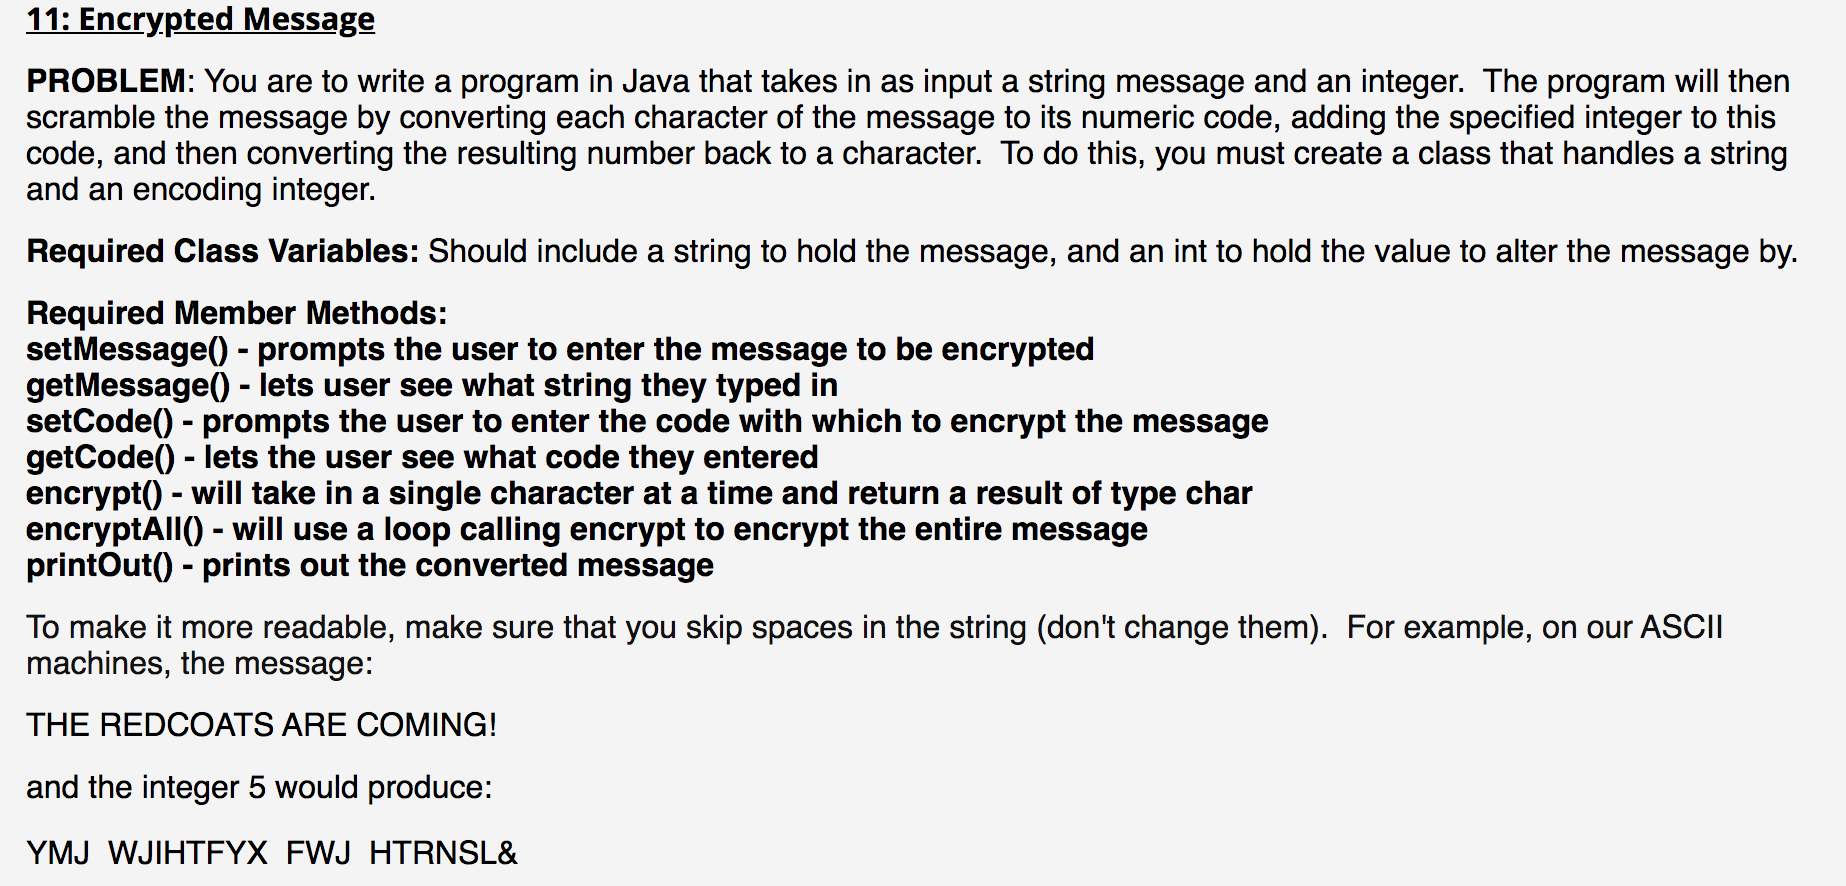 PROBLEM: You are to write a program in Java that takes in as input a string message and an integer. The program will then
scramble the message by converting each character of the message to its numeric code, adding the specified integer to this
code, and then converting the resulting number back to a character. To do this, you must create a class that handles a string
and an encoding integer.
